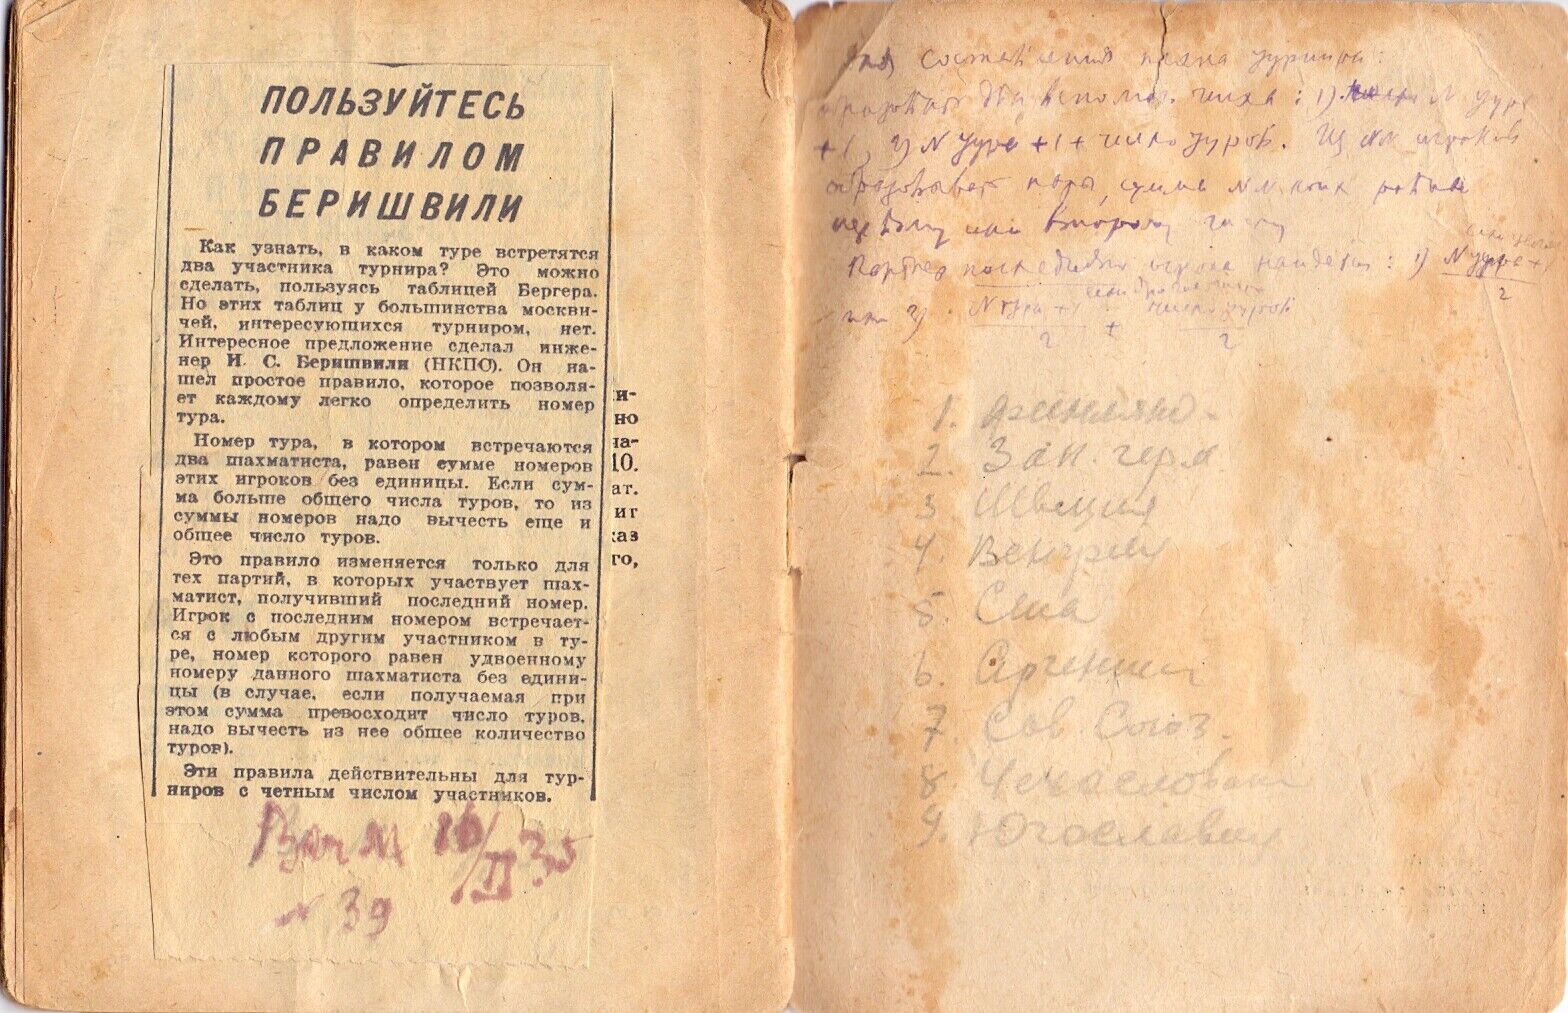 11533.Russian chess book: N.Zubarev. 1935 Unified chess code of the USSR